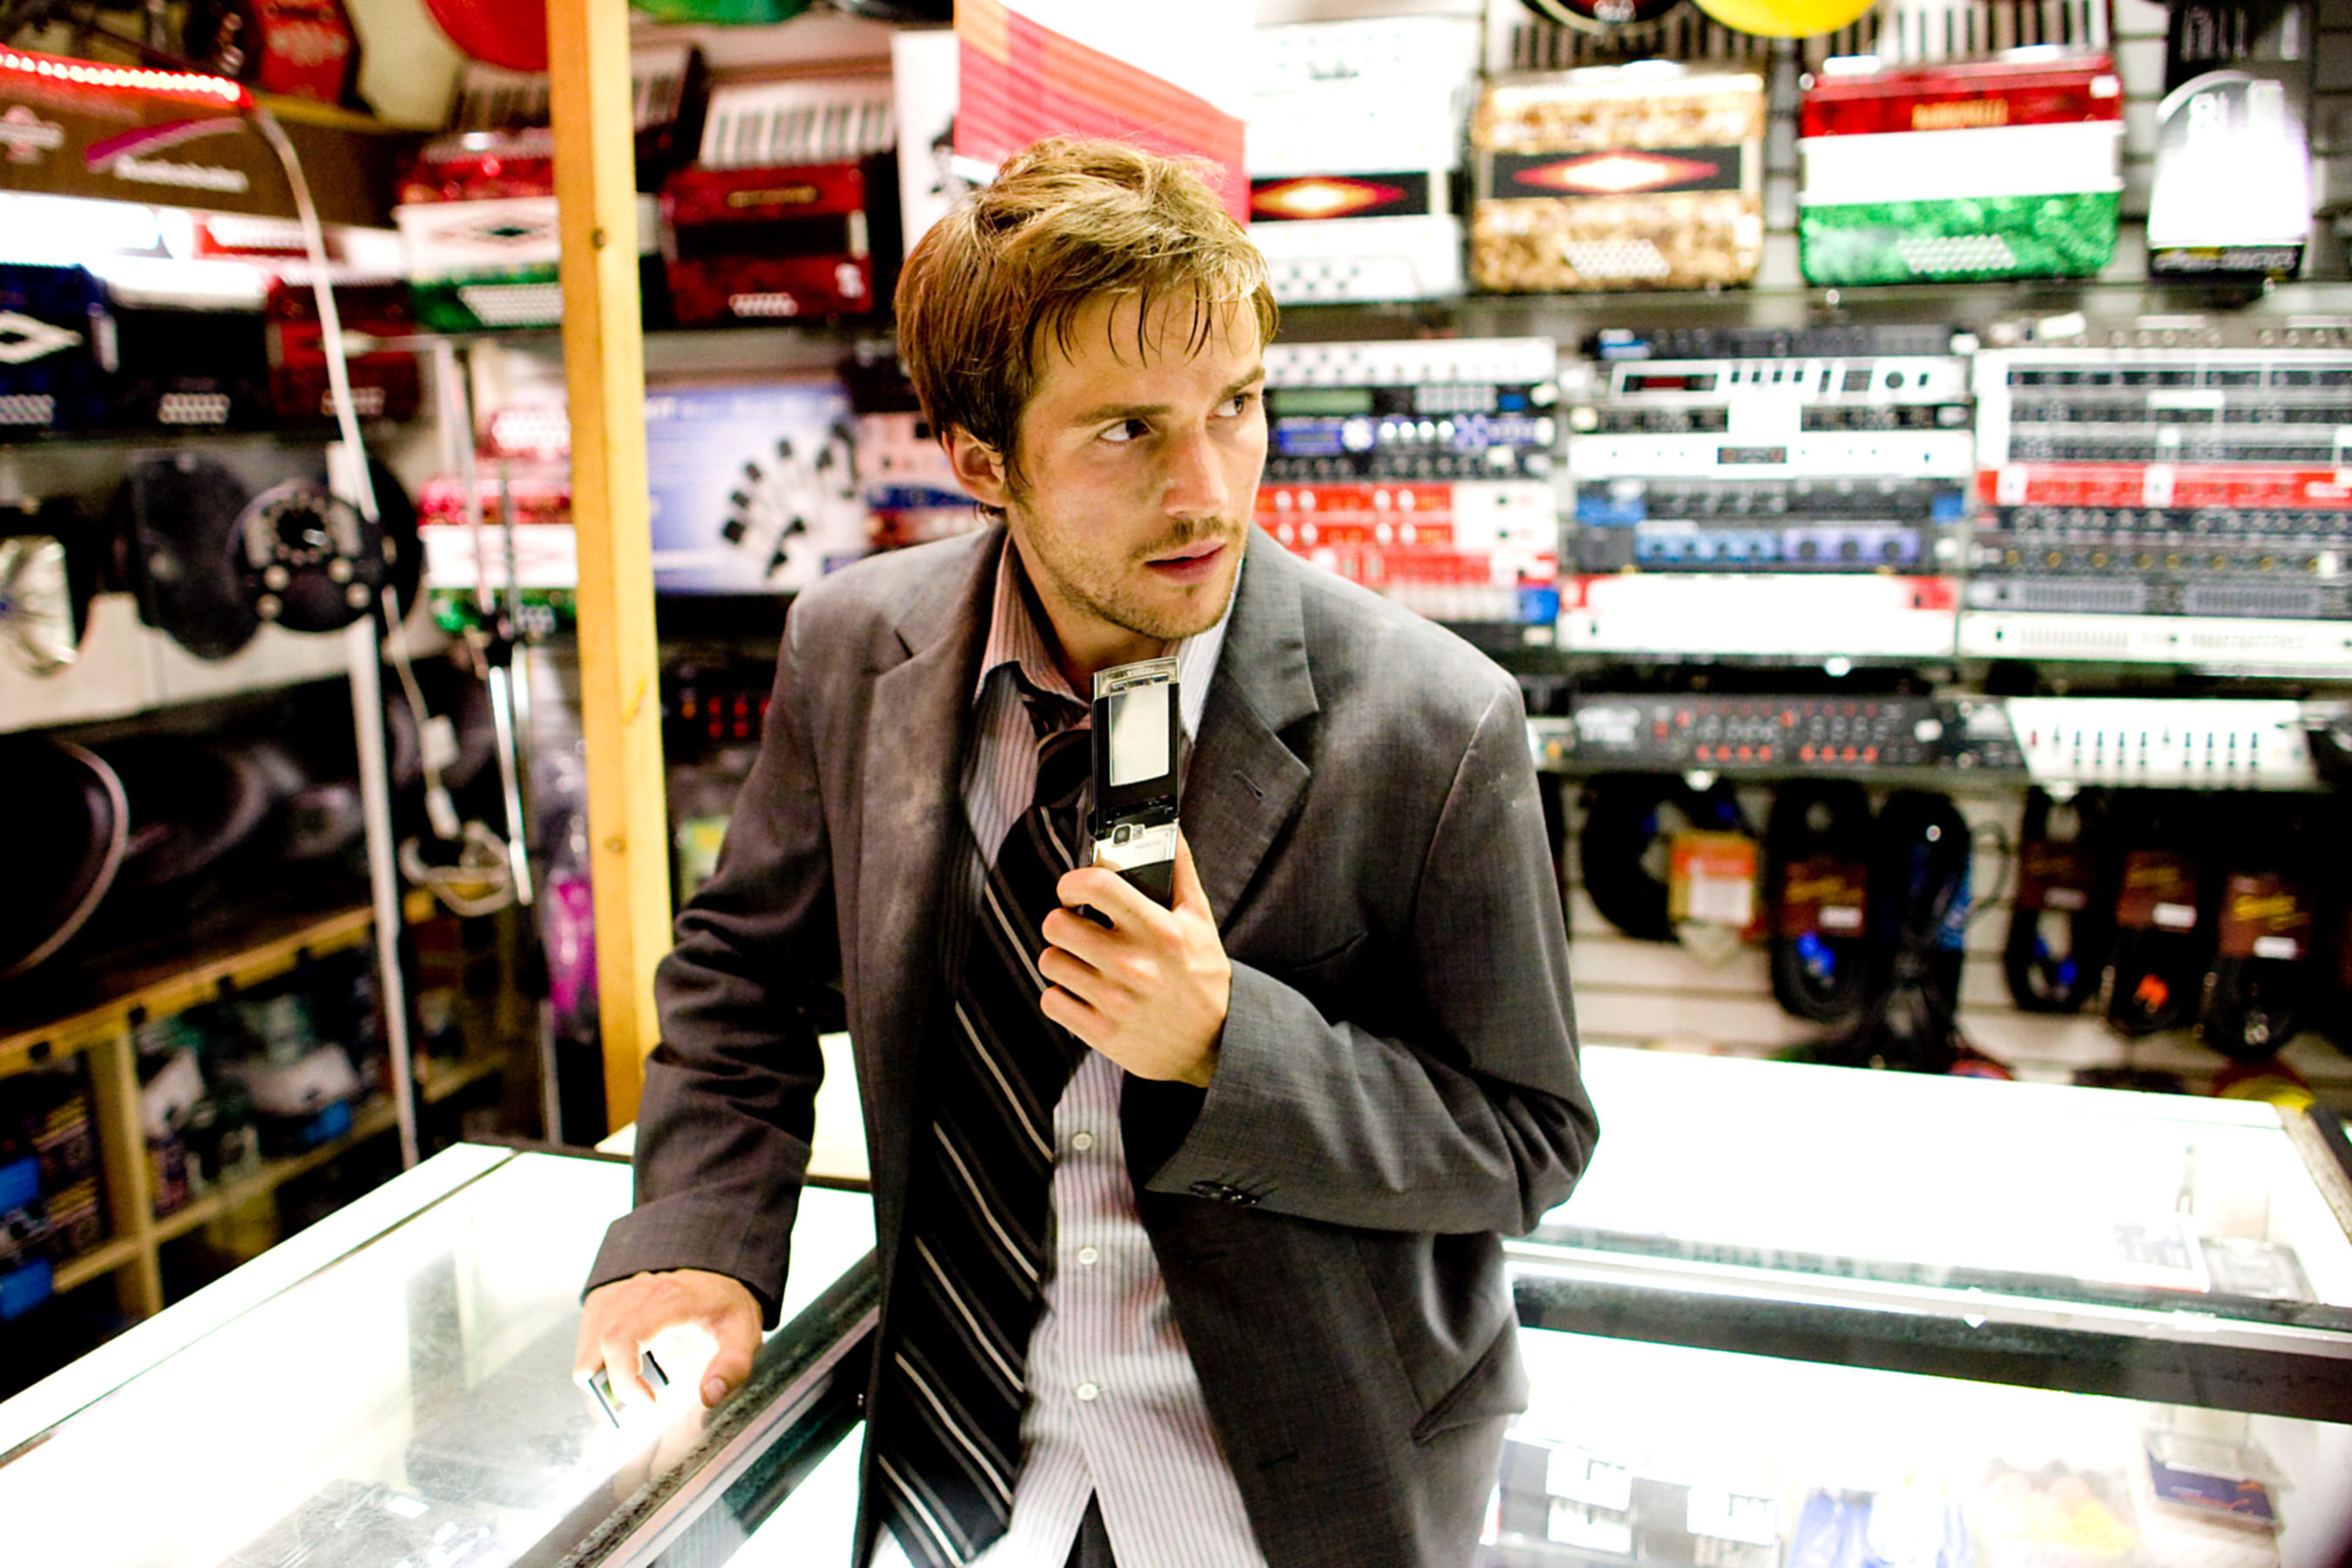 Michael Stahl-David as Rob in a store